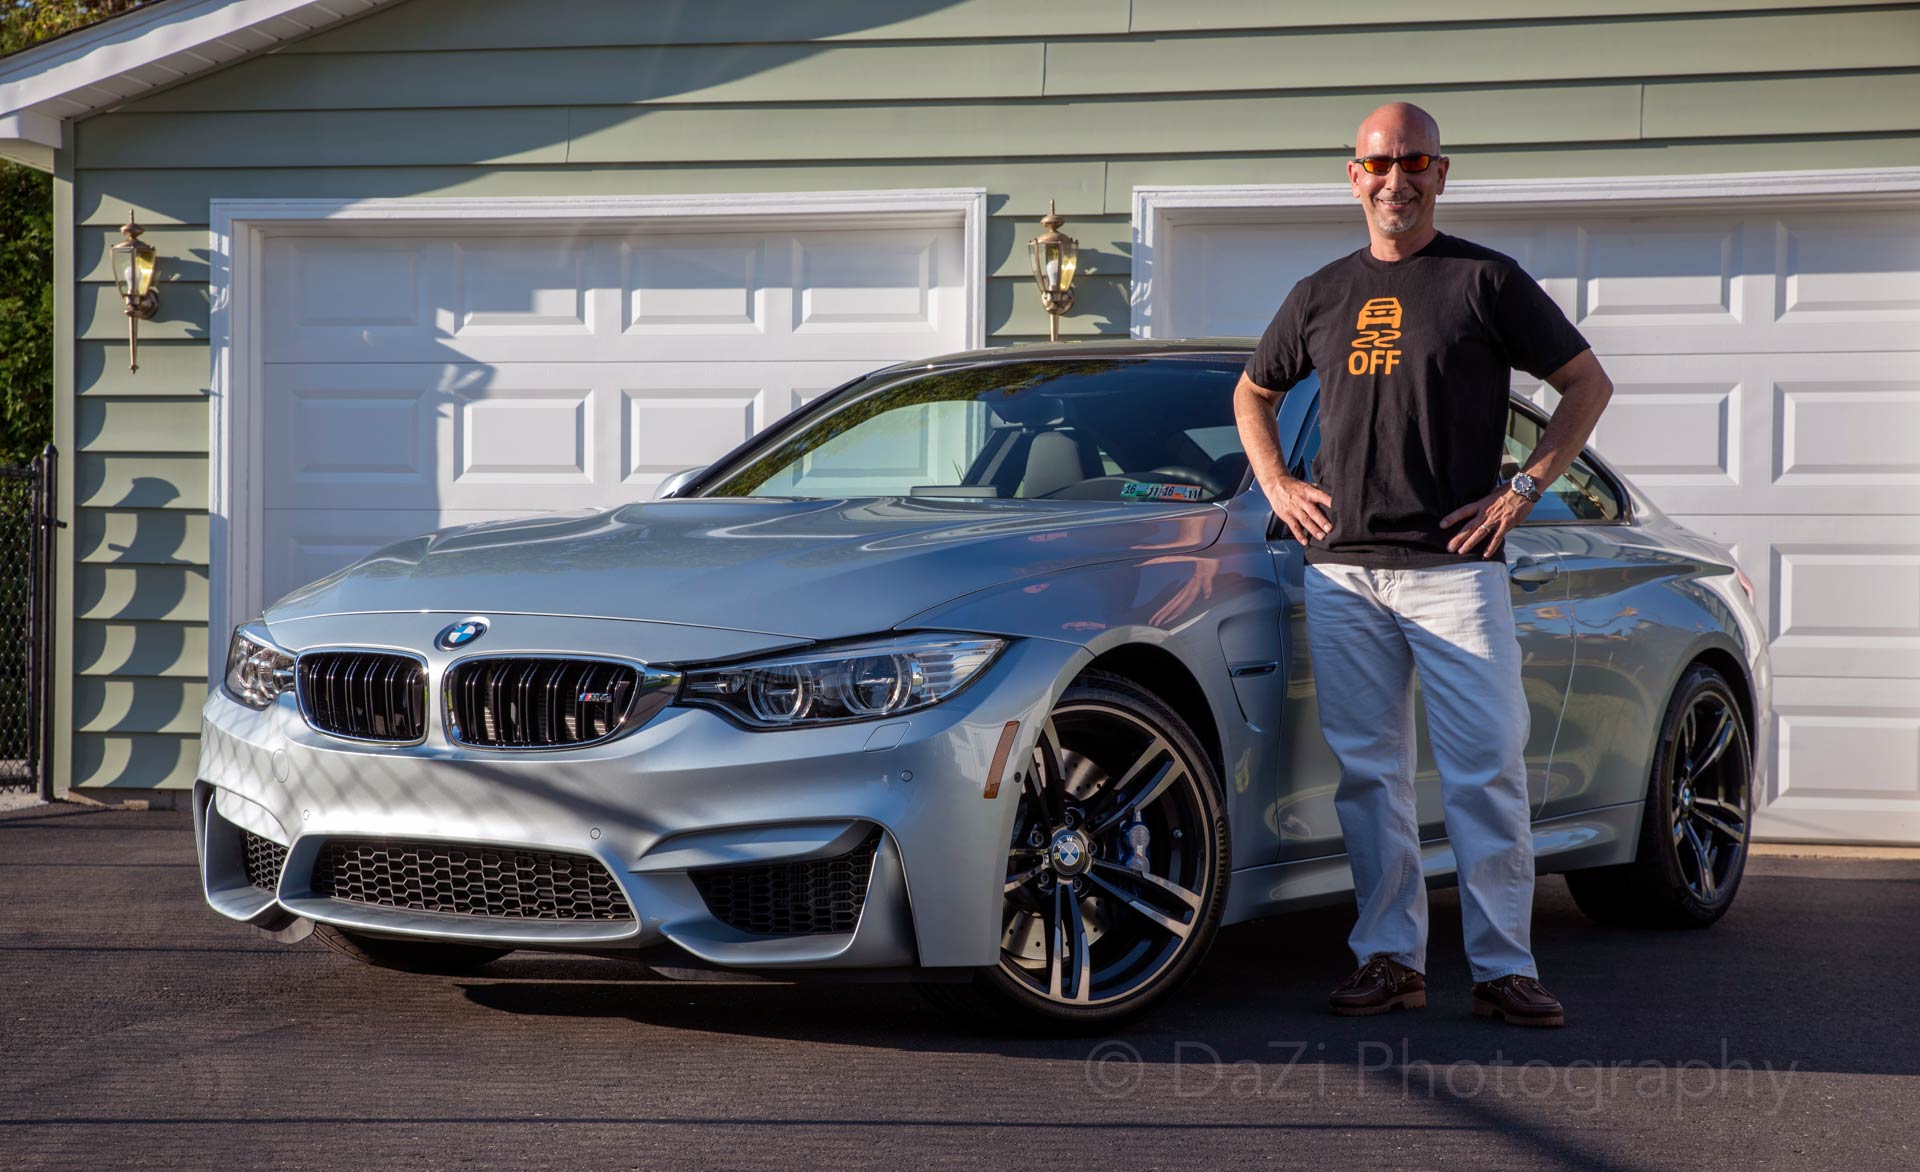 Danny with his Silverstone M4